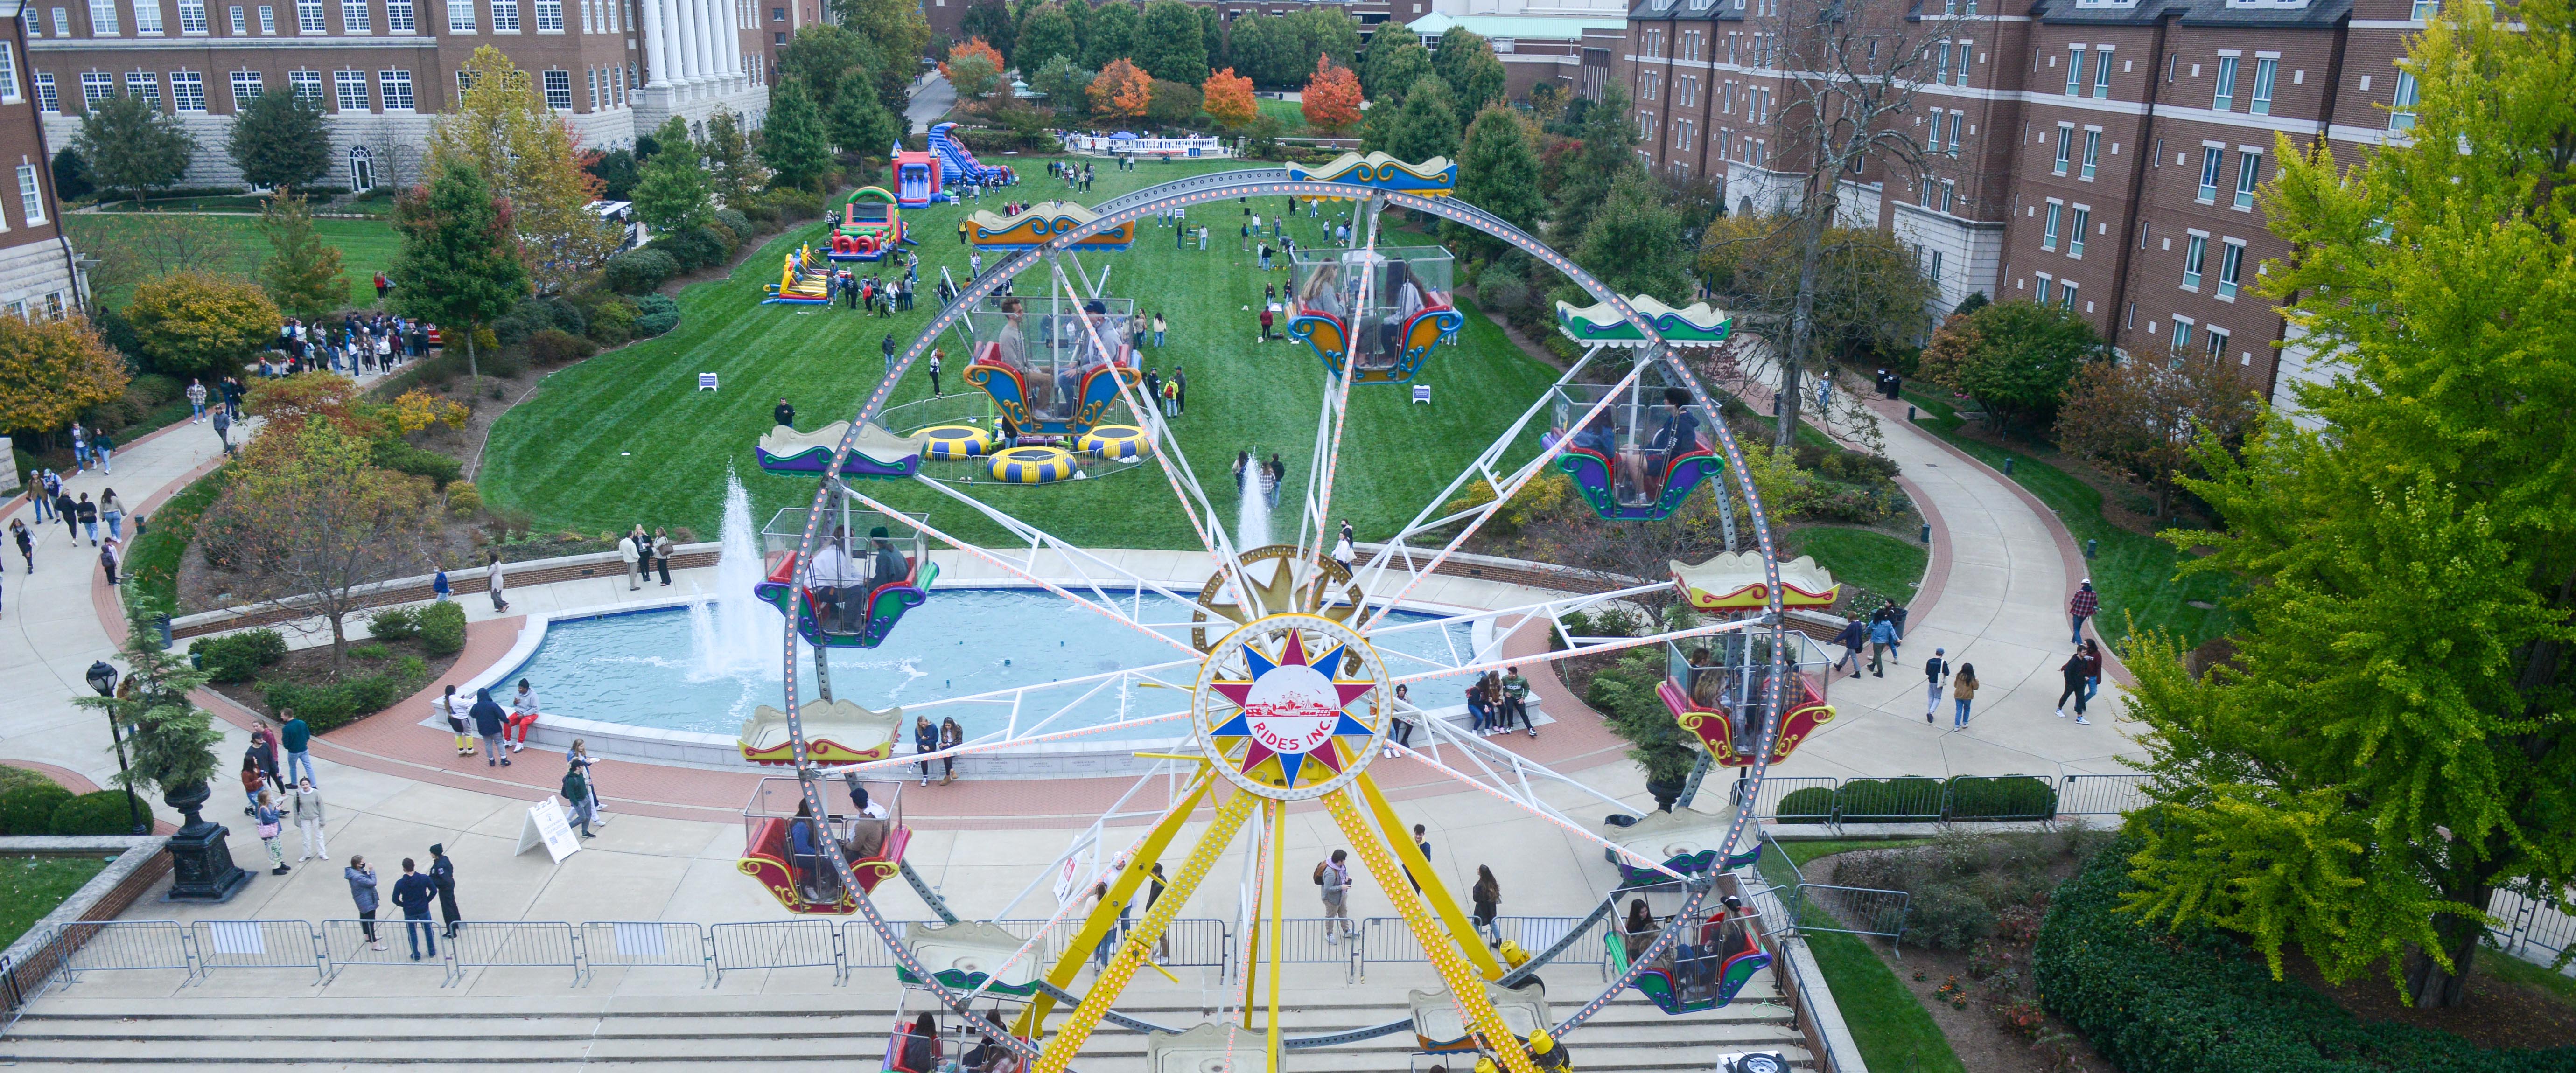 A ferris wheel on Belmont's Campus during Hope Summit